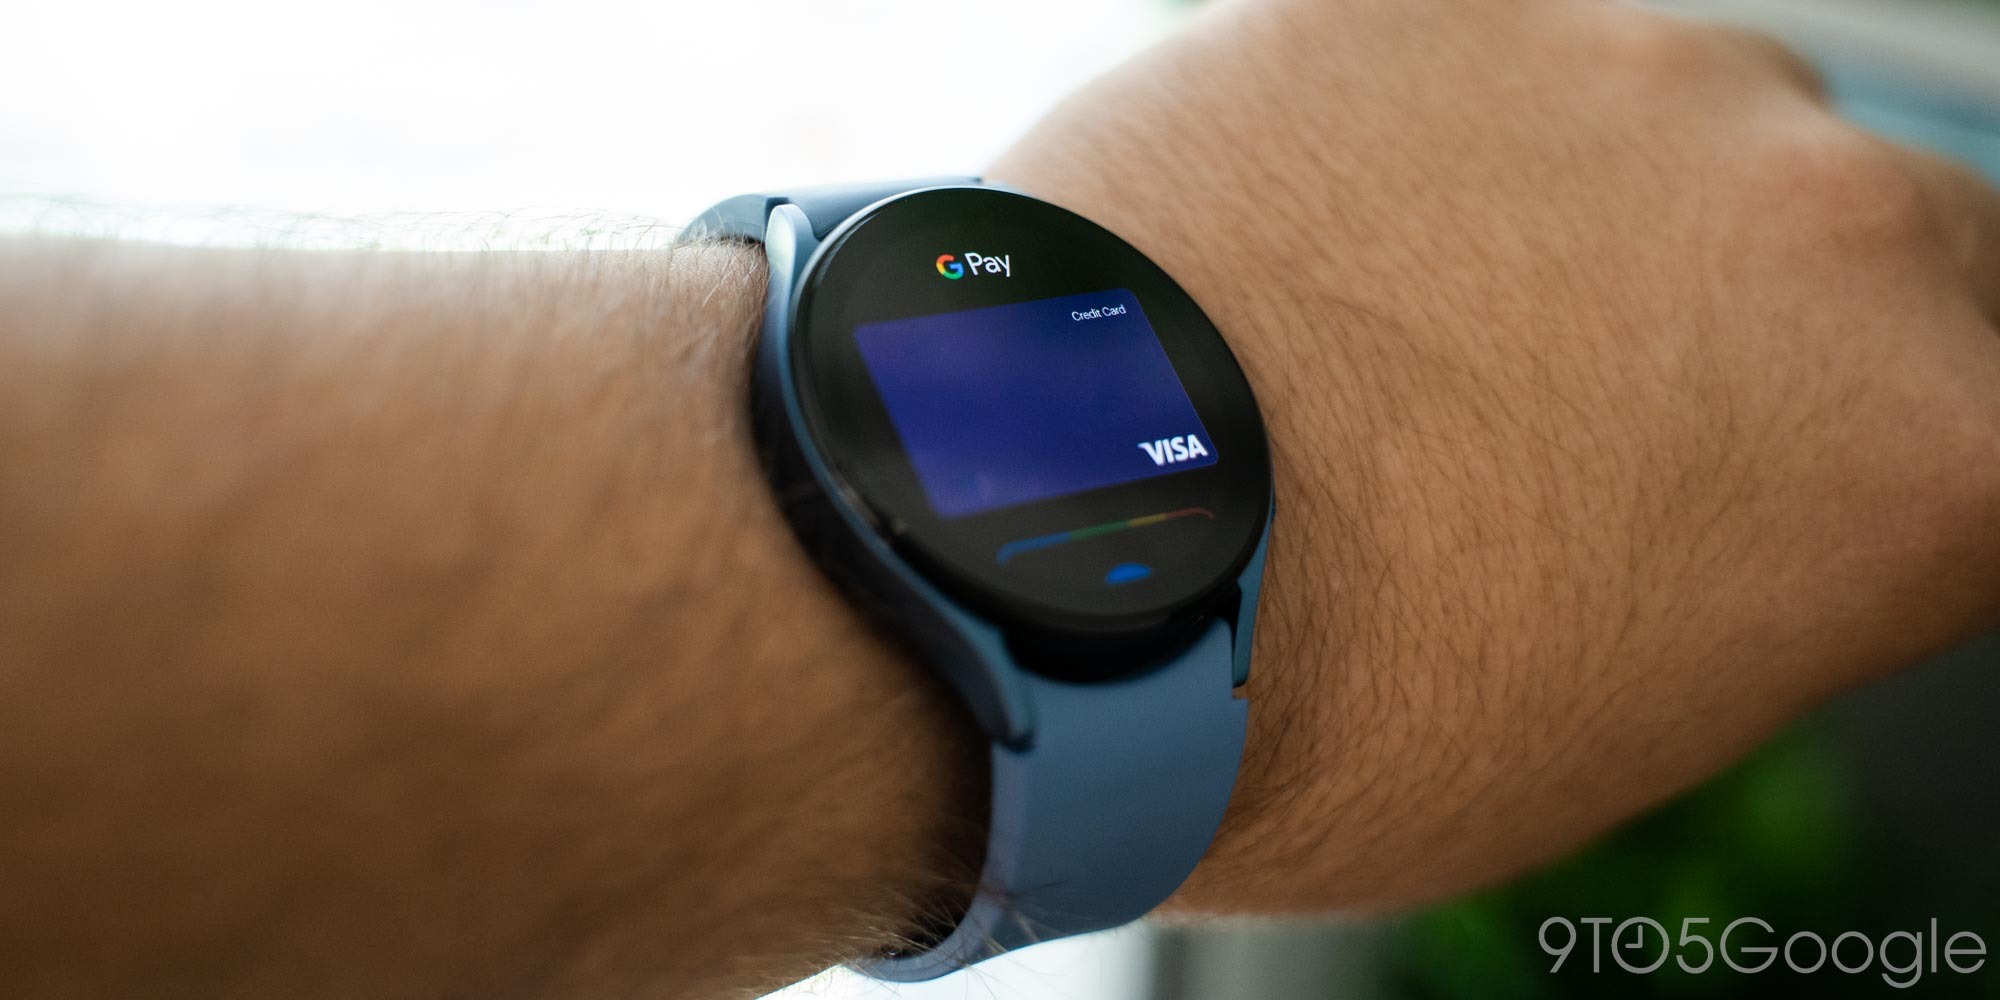 How To Use Google Wallet on Your Smartwatch